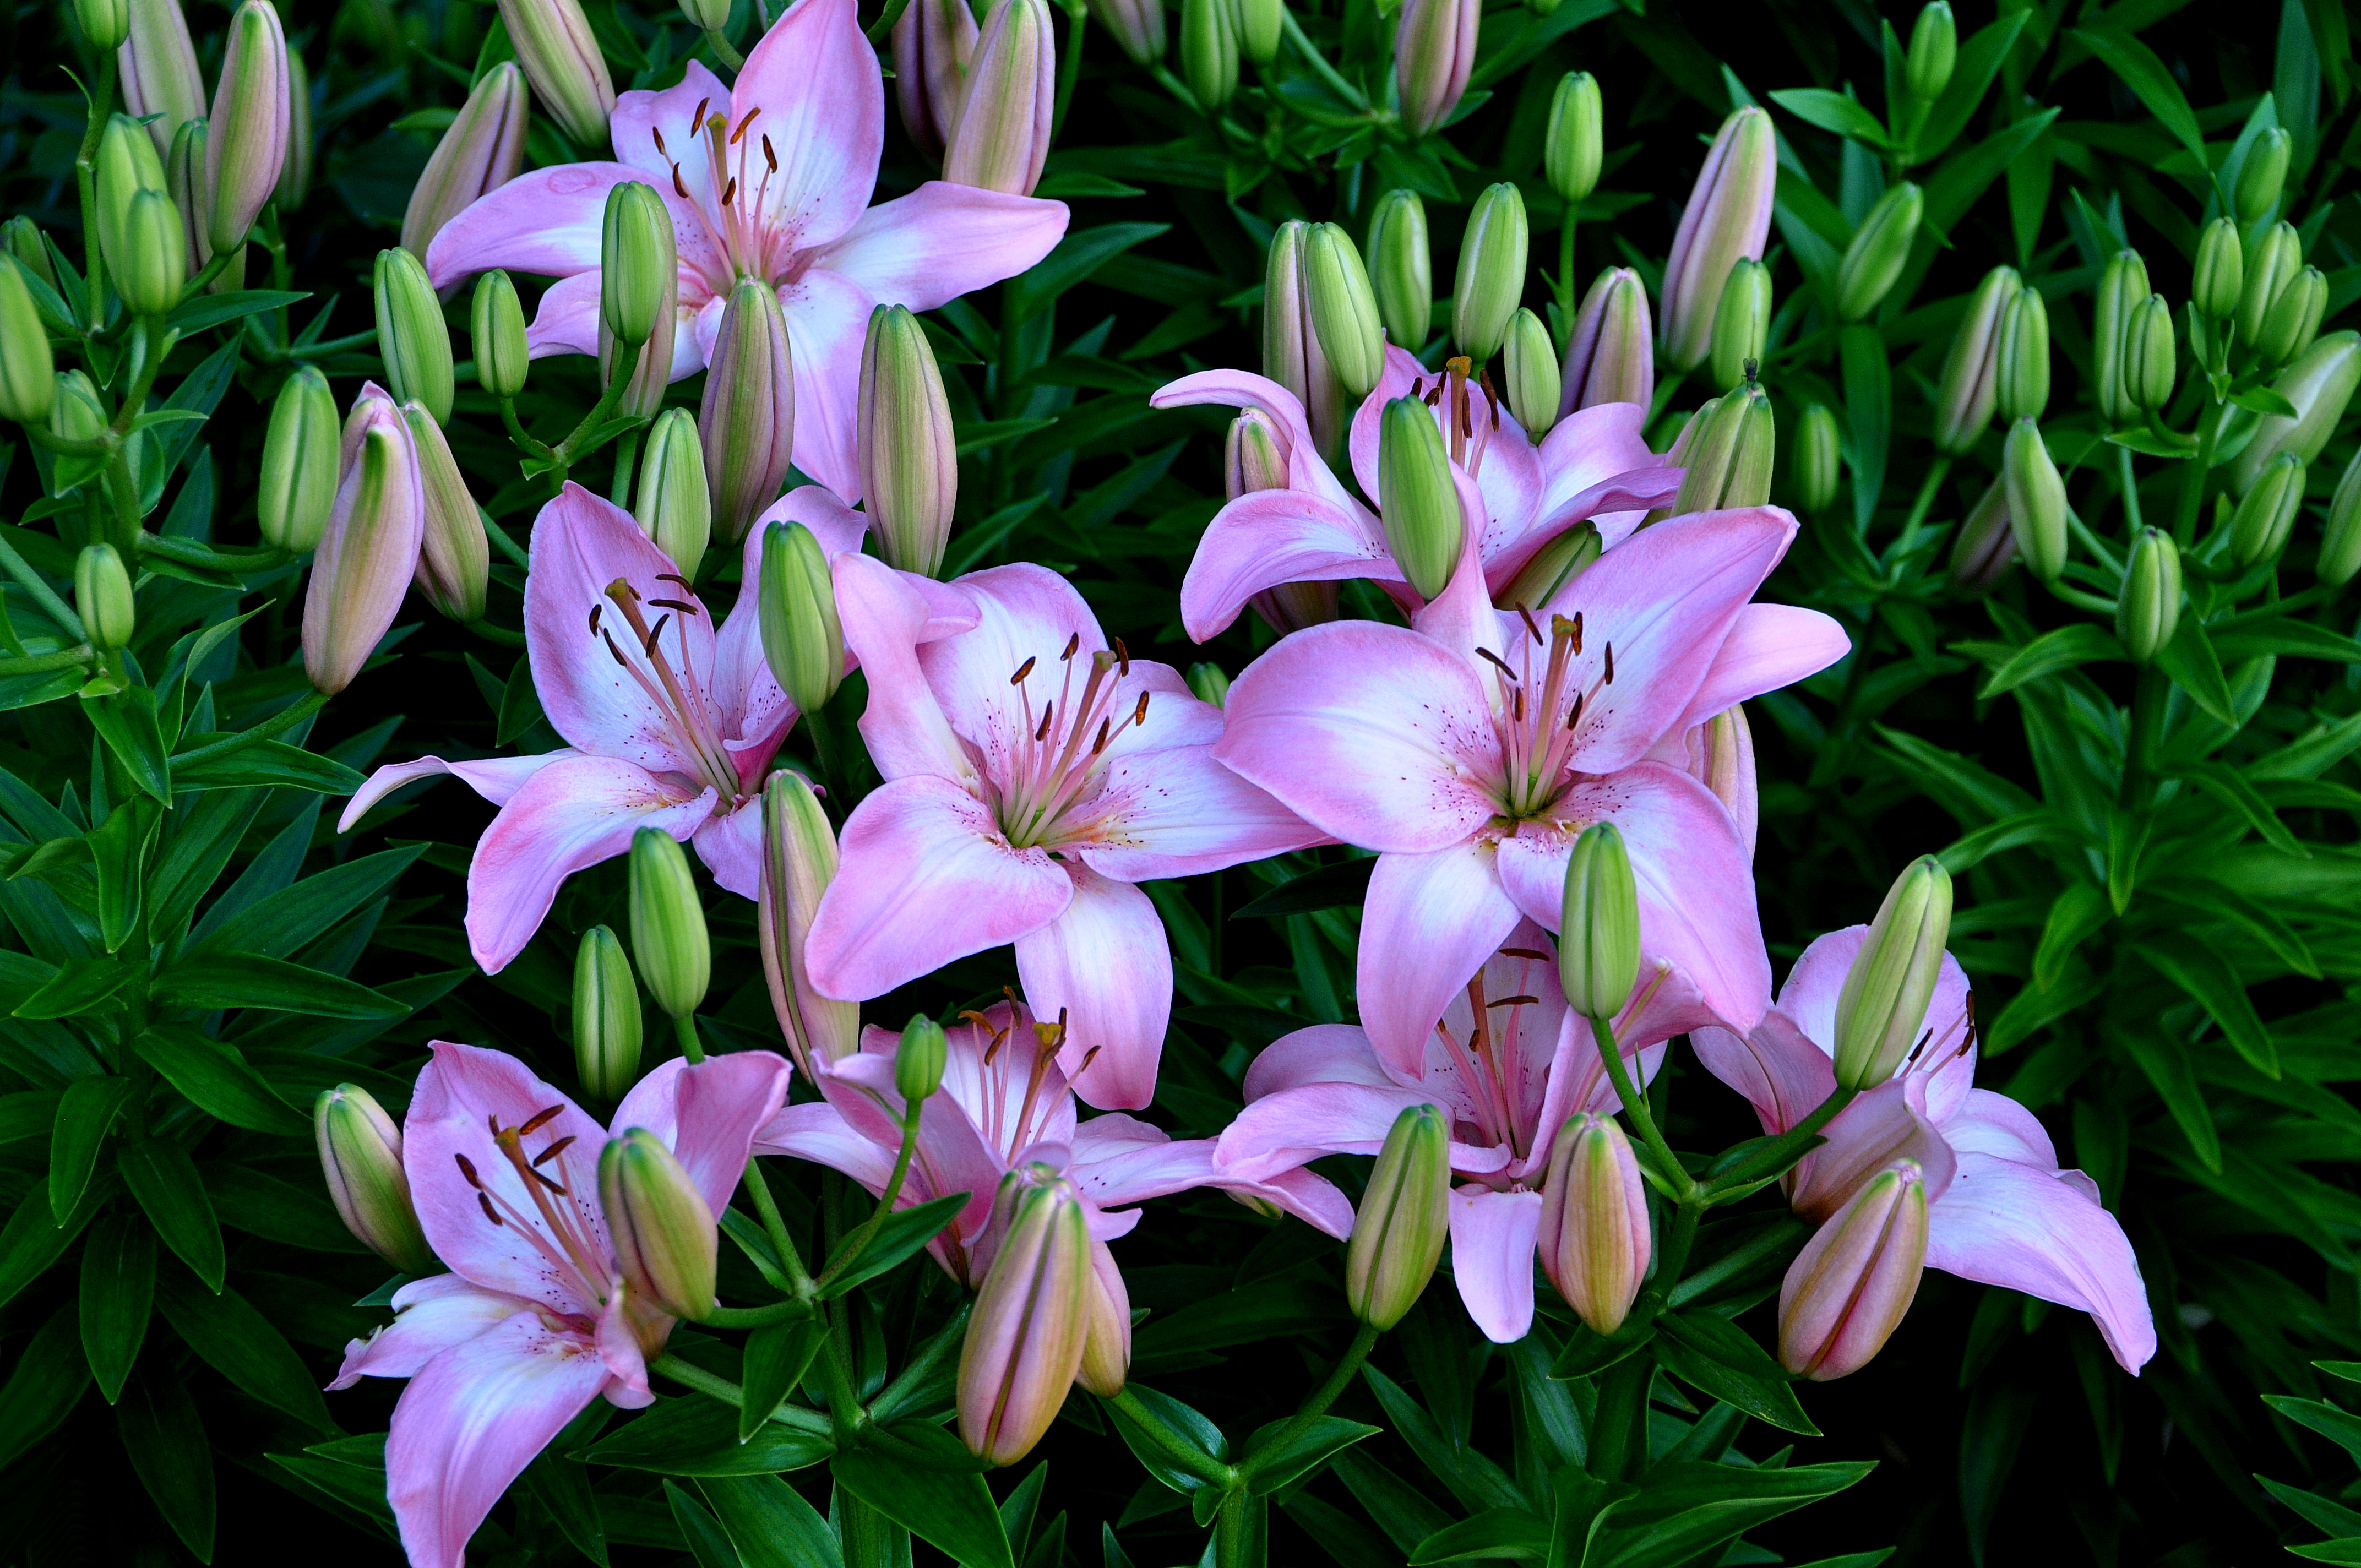 Wallpapers lilies bushes lilyt on the desktop